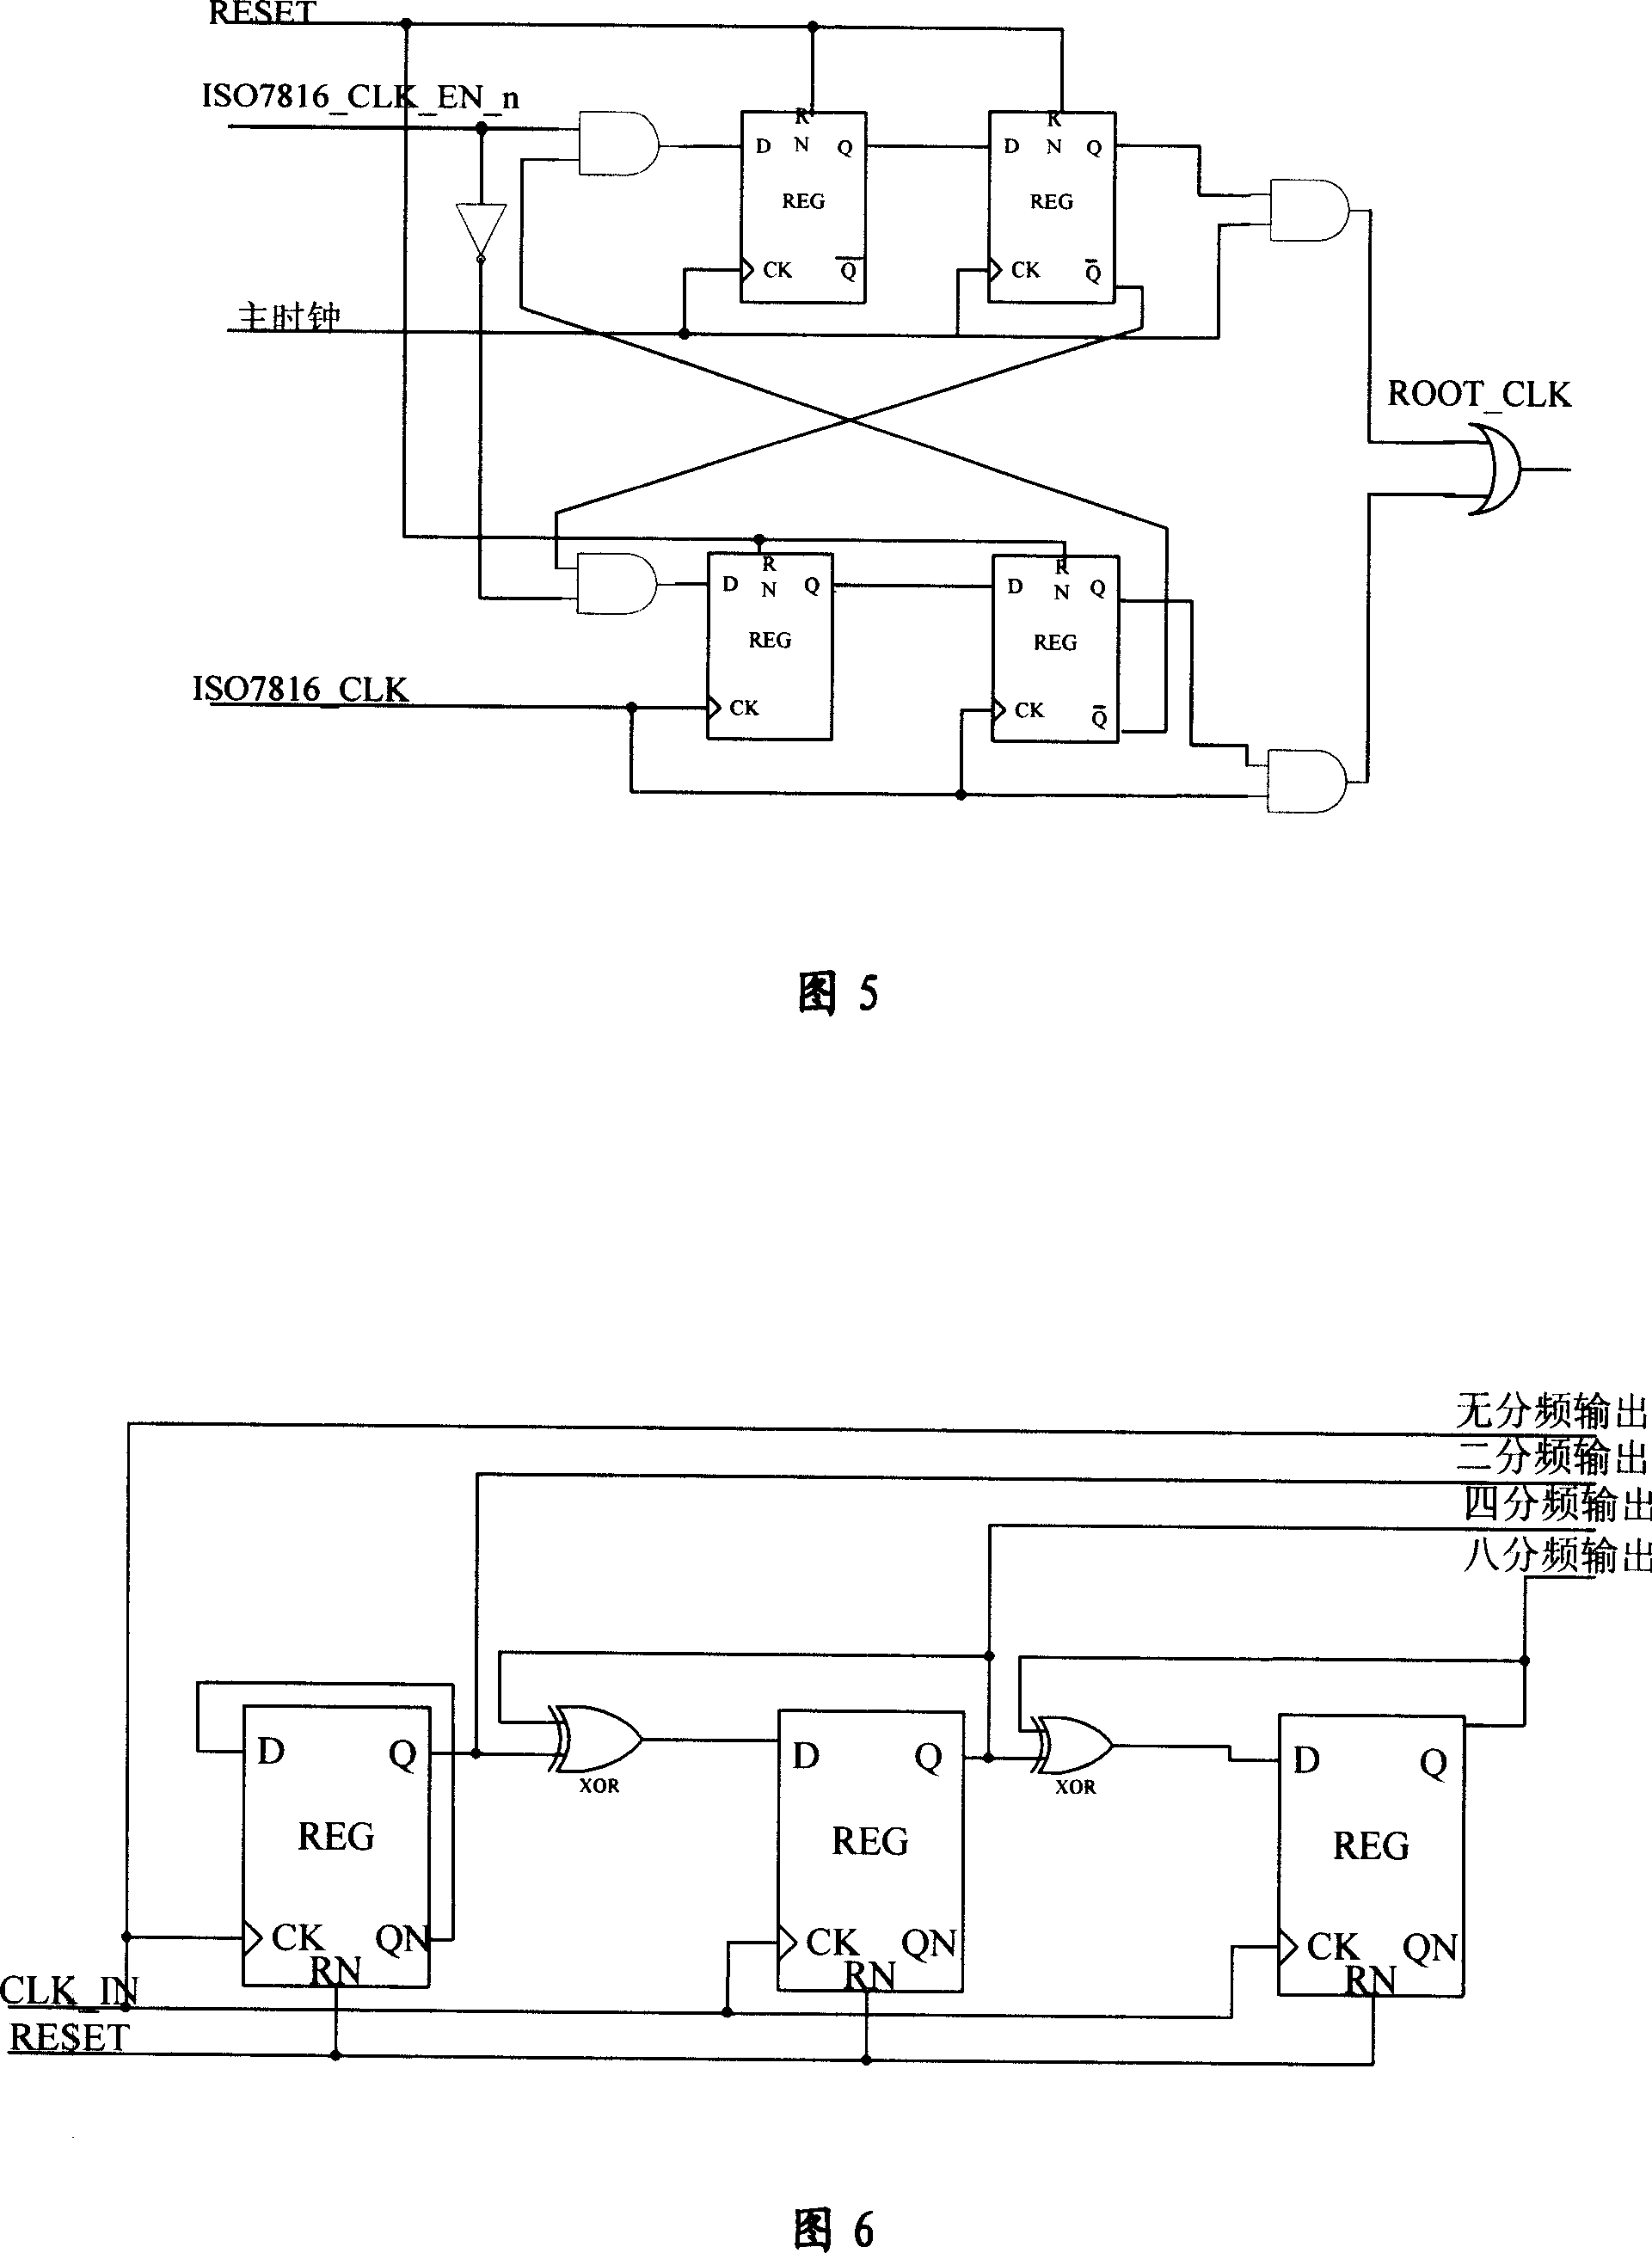 Unit and method for implementing clock management of high-speed high capacity smart card